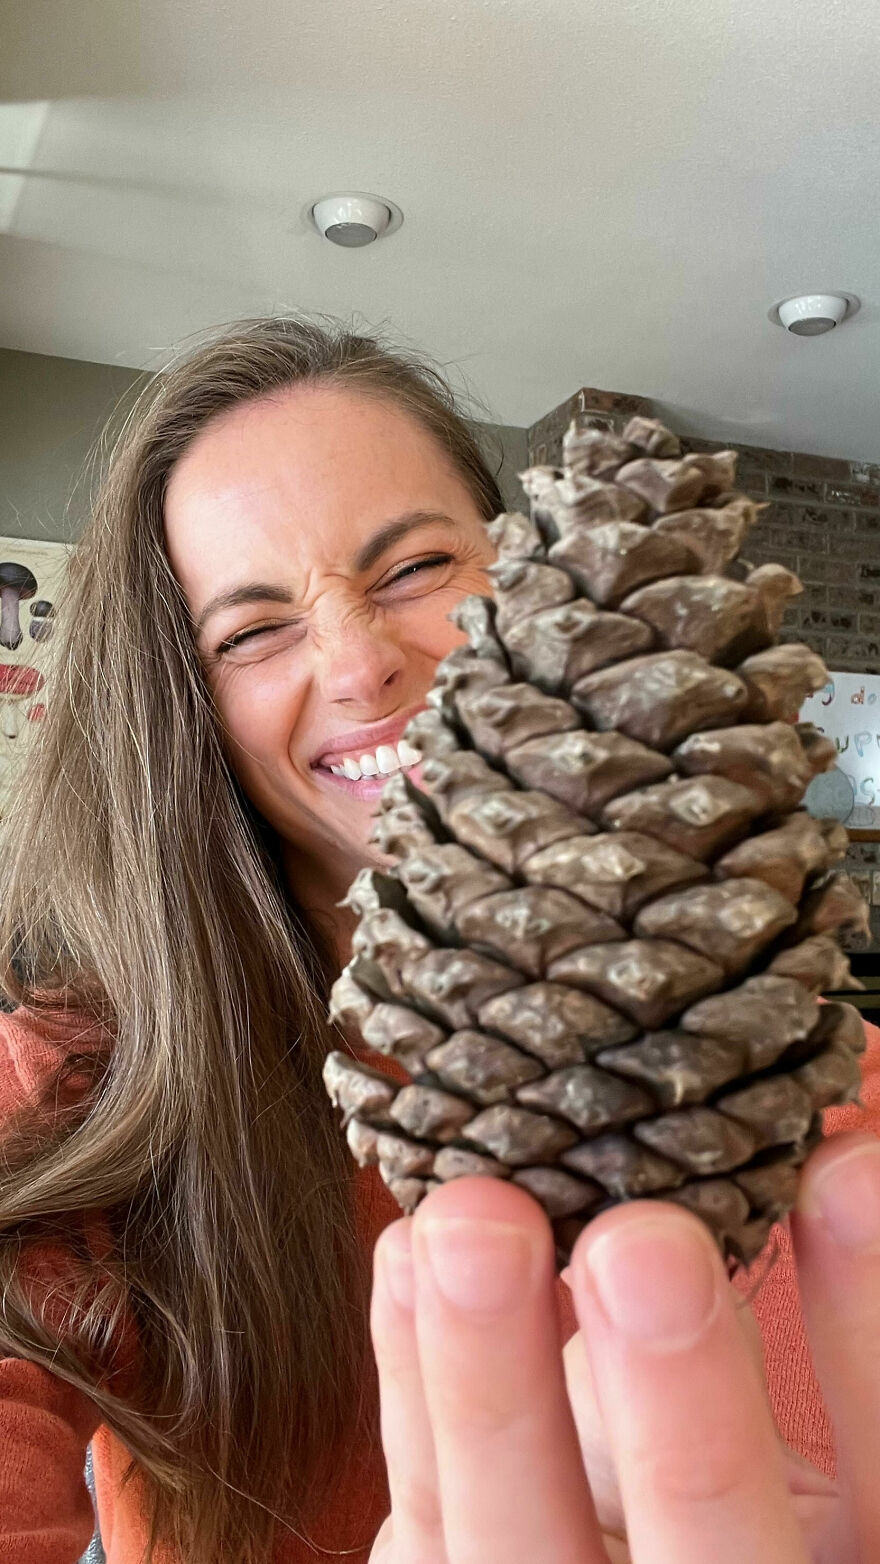 I Challenged Myself To See How Far I Could Get In Trading When Starting With A Pinecone, And Here's How It Went